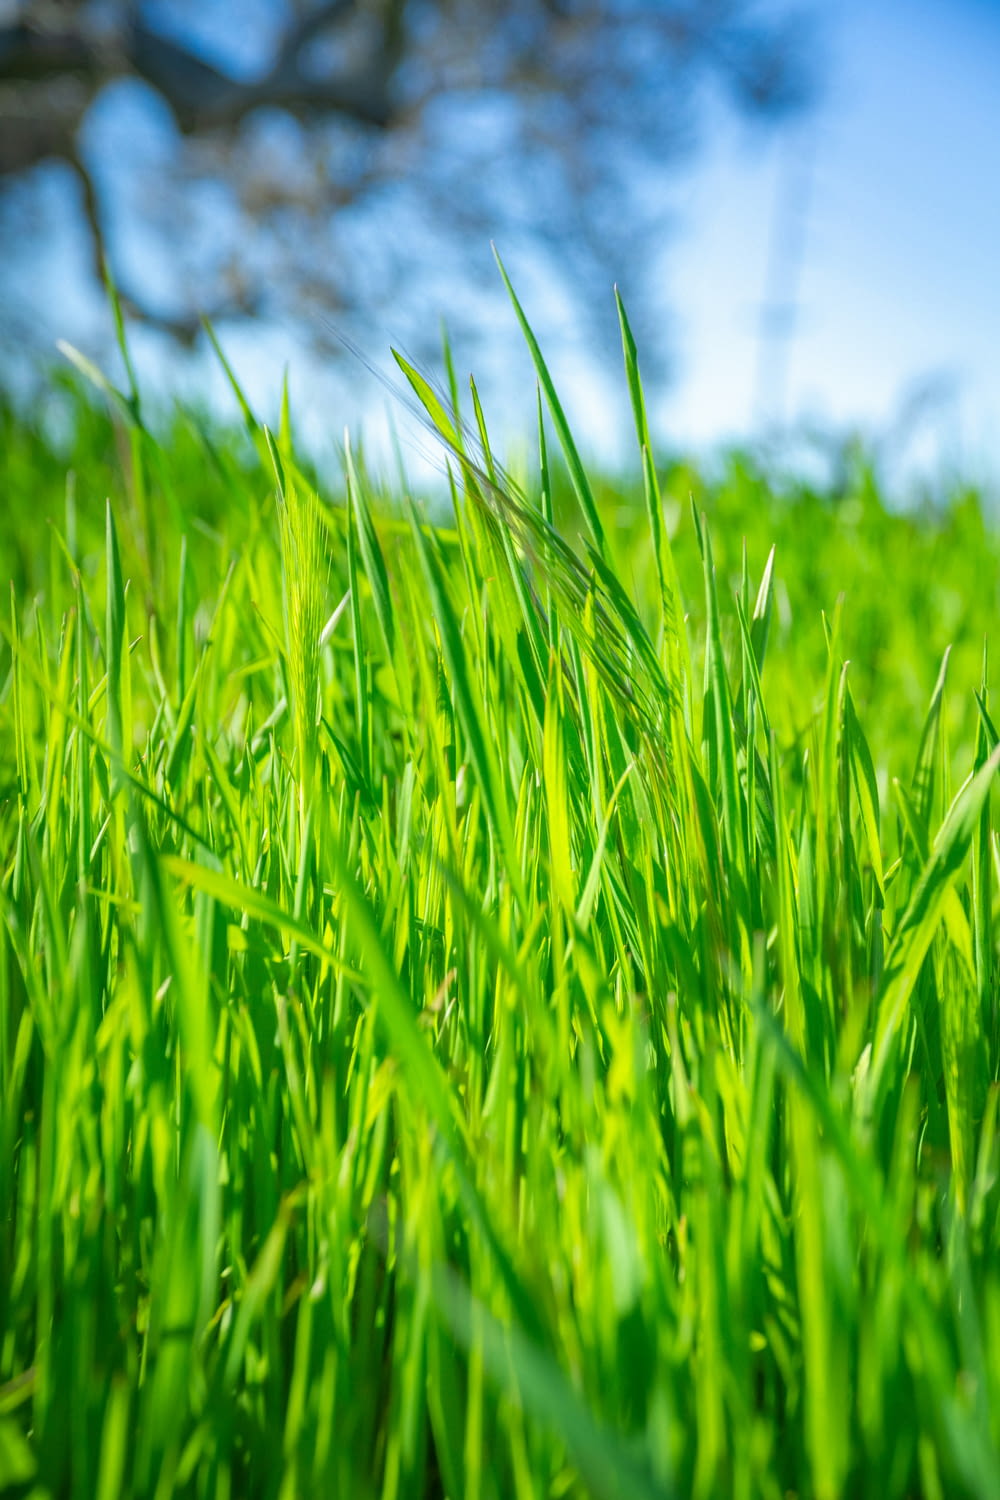 a close up of some green grass with a tree in the background